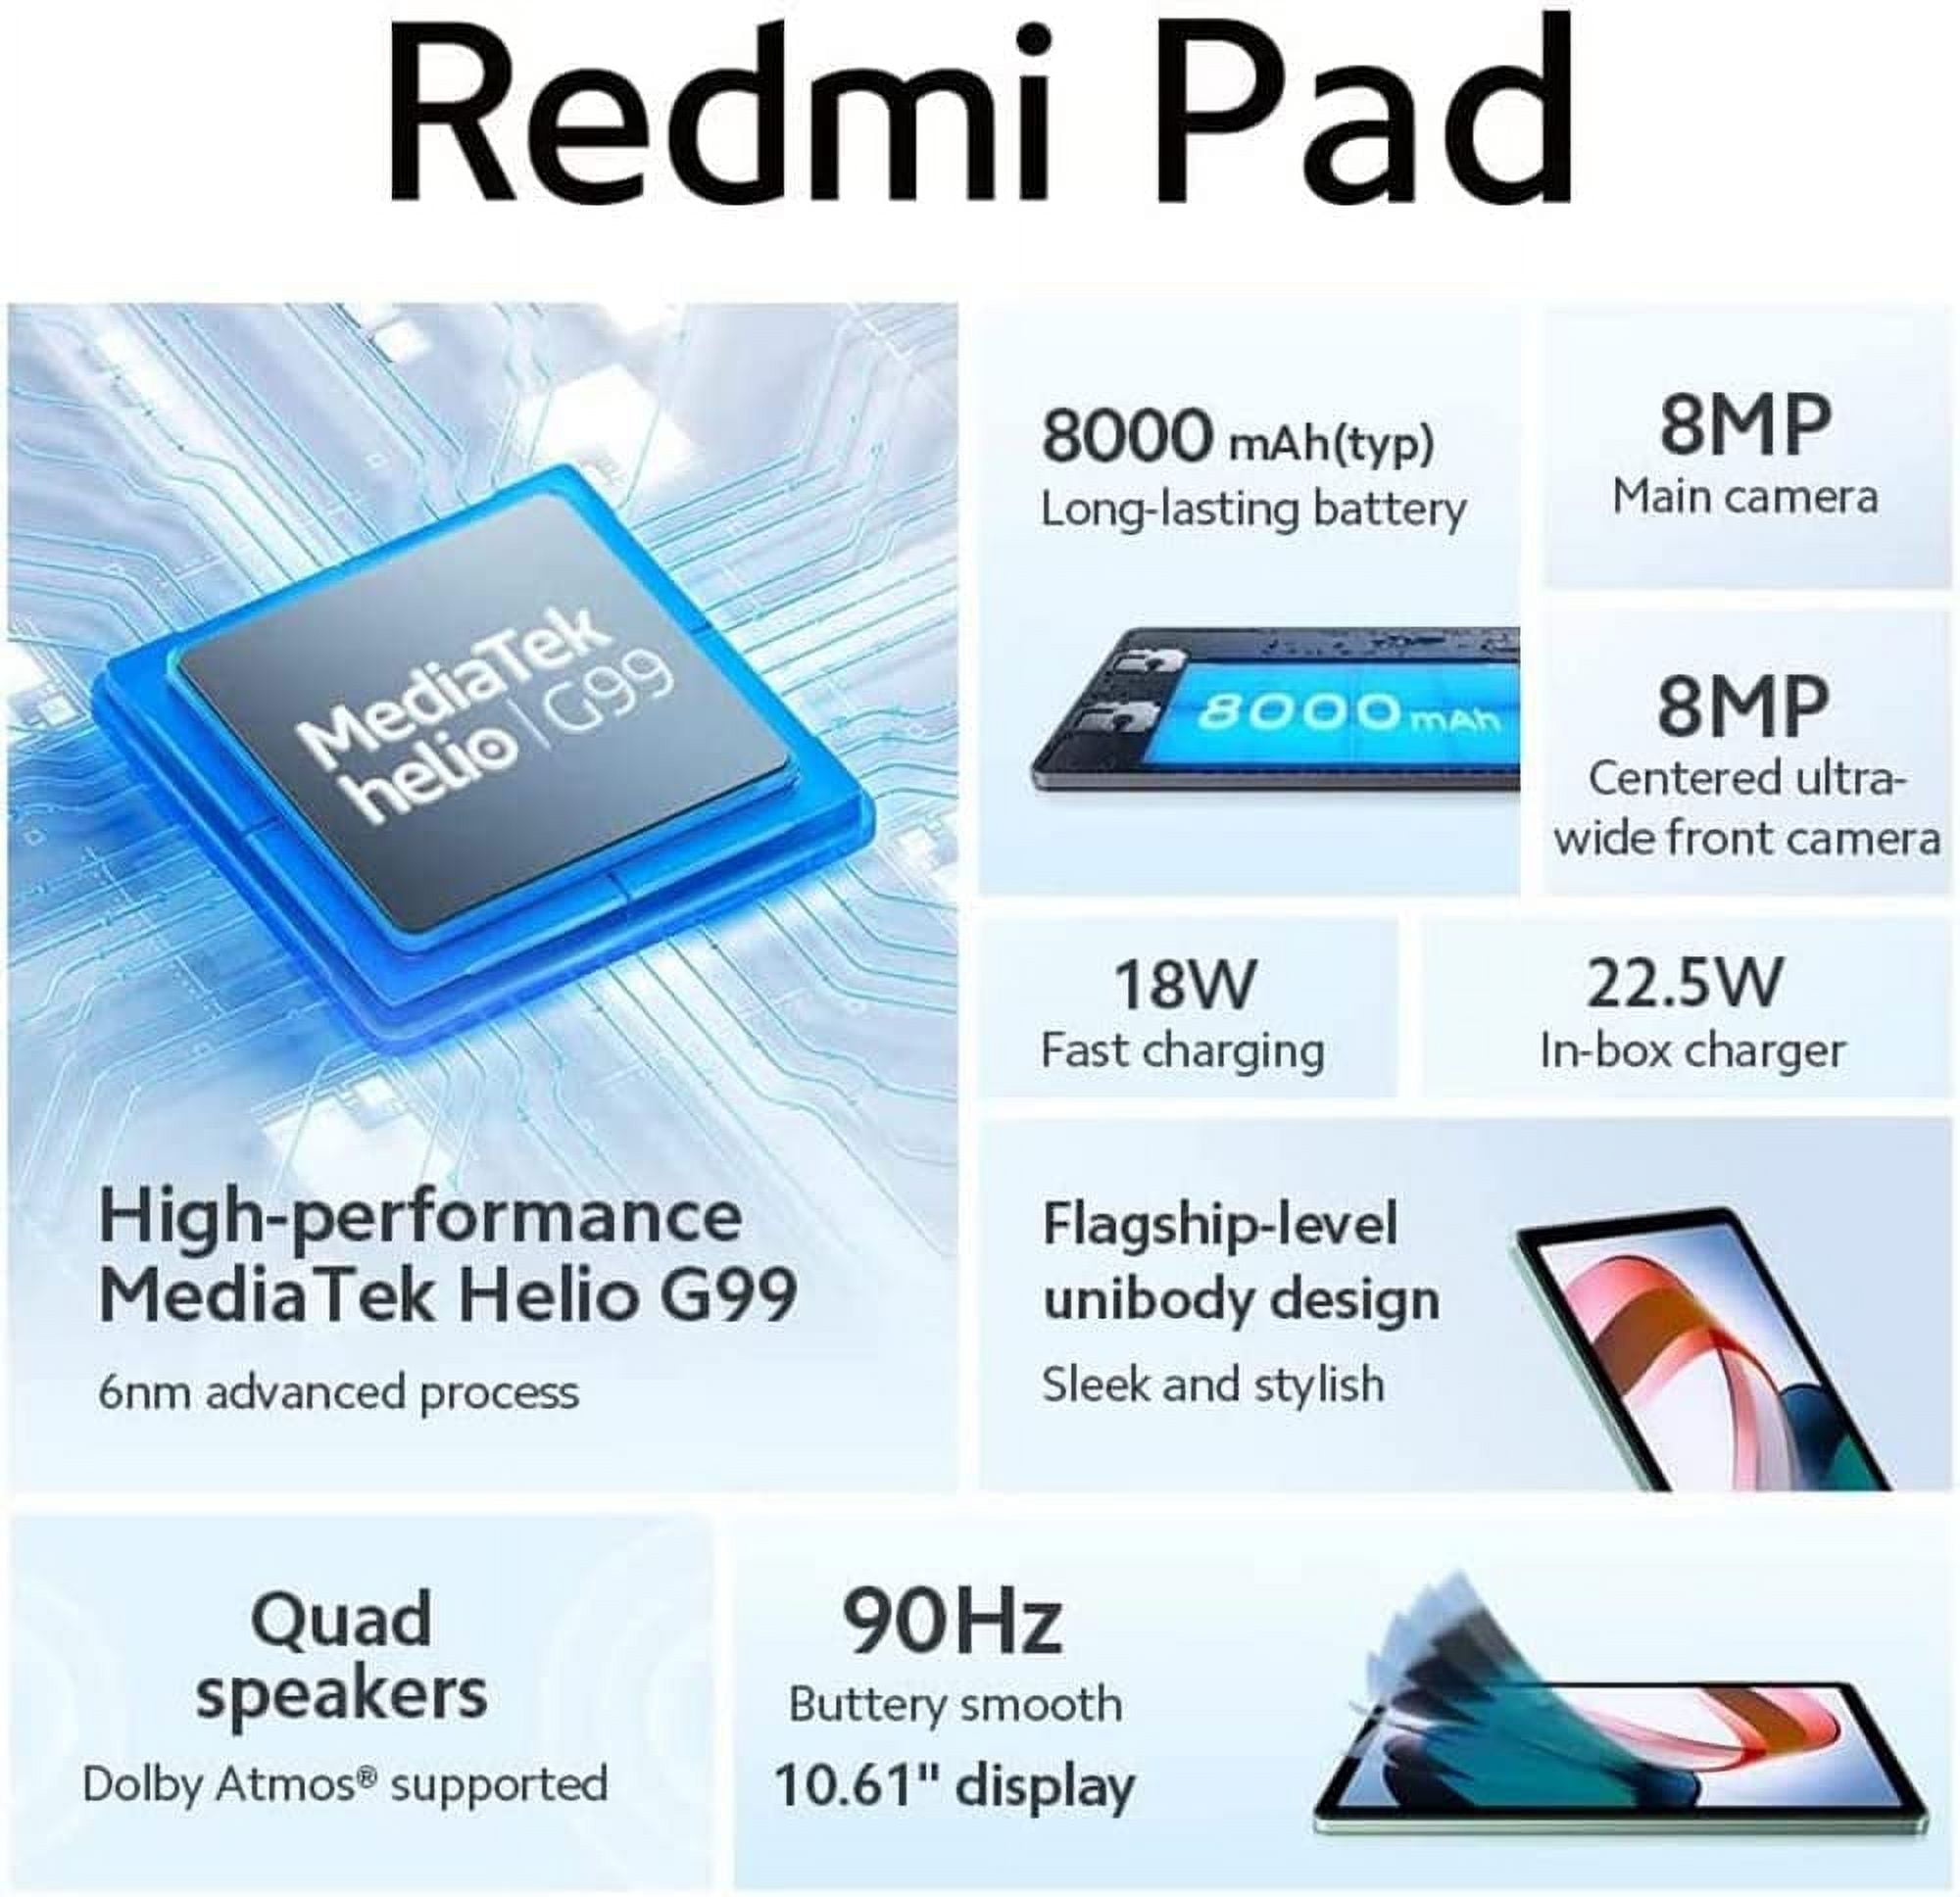 Xiaomi Redmi Pad Only WiFi 10.61 Octa Core Dolby Atmos 8000mAh Bluetooth  5.3 8MP + Fast Car Charger Bundle (Graphite Gray, 128GB + 6GB)